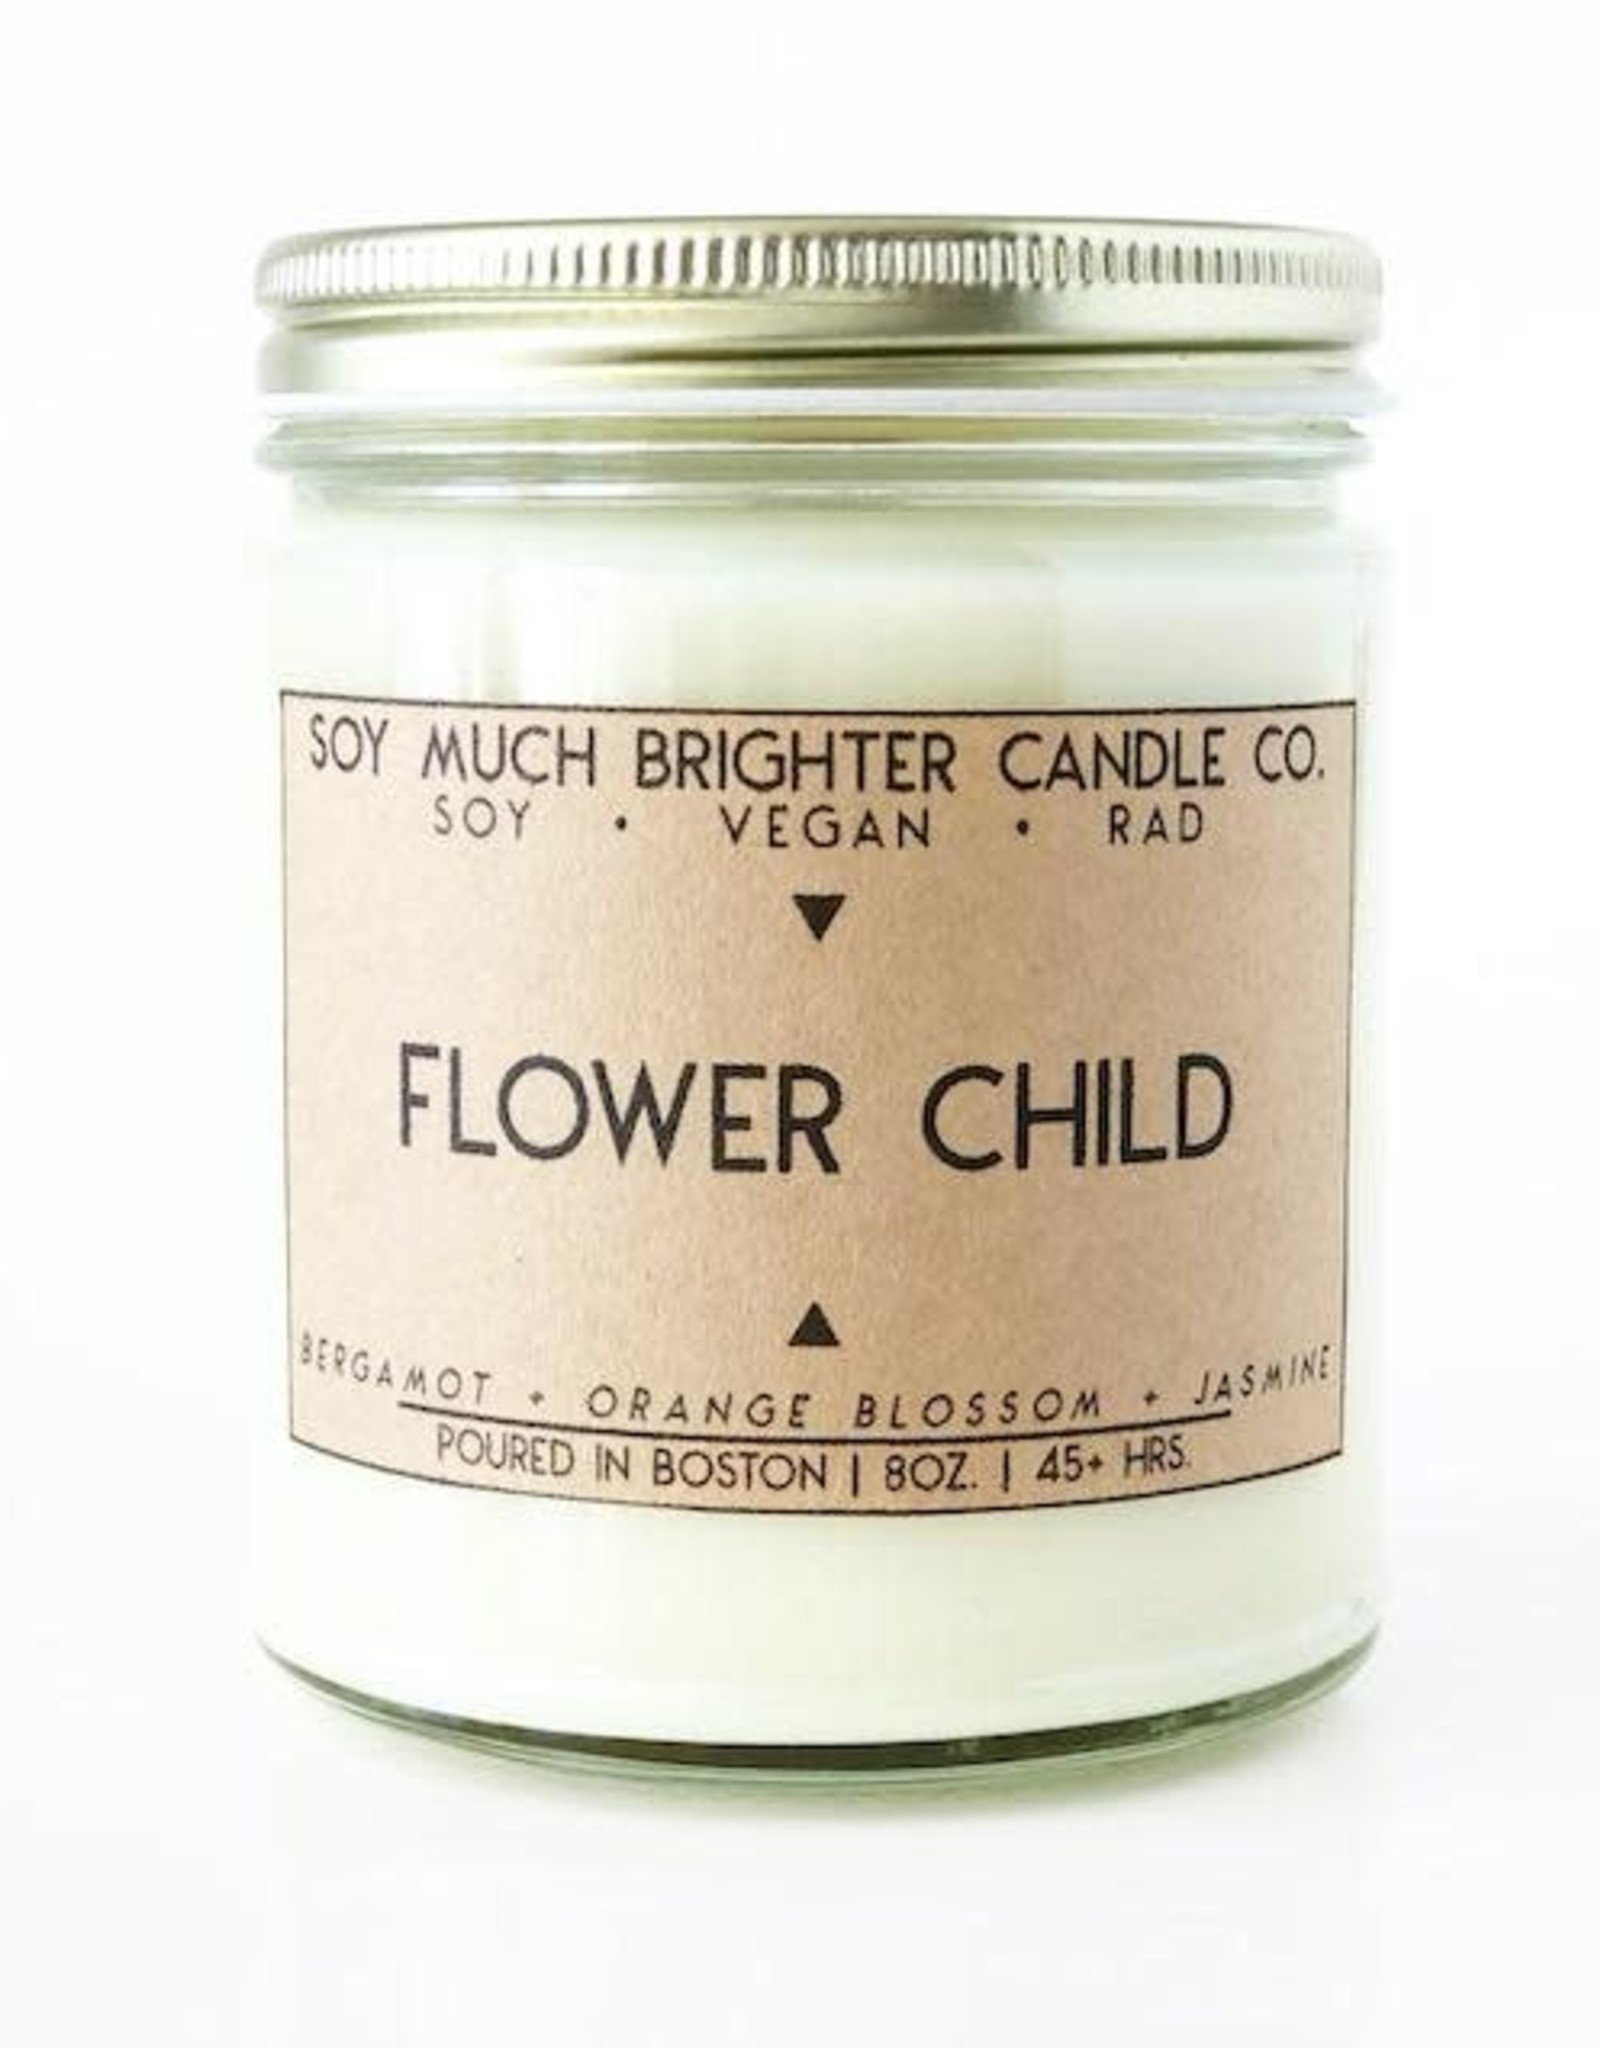 Soy Much Brighter Soy Much Brighter Candles Sweet Series